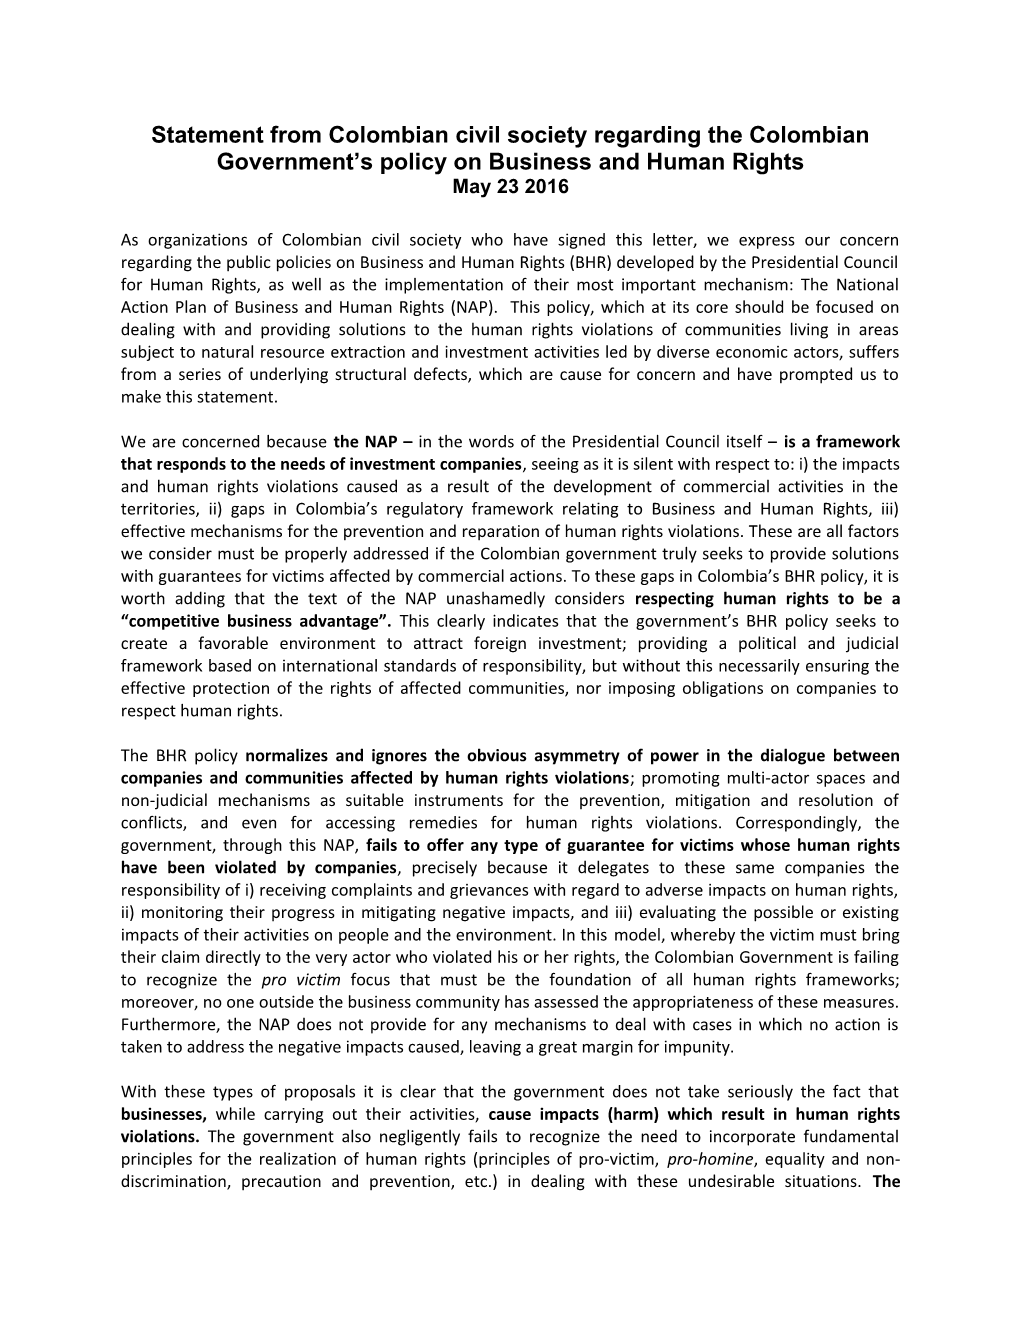 Statement from Colombian Civil Society Regarding the Colombian Government S Policy On